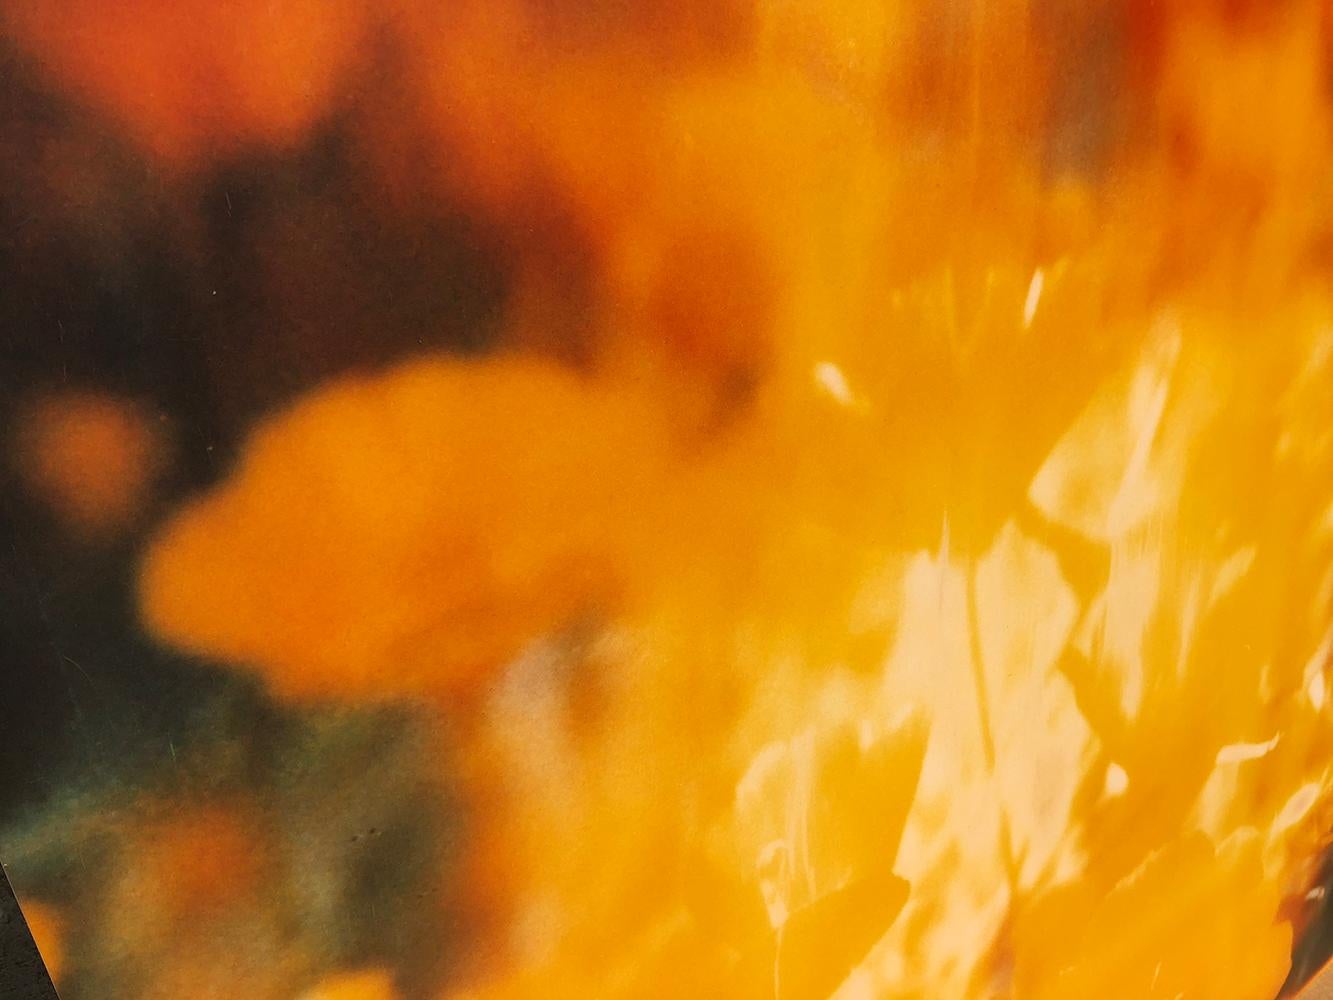 Yellow Flower (The Last Picture Show) - 2005

128x125cm, 
Edition 4/5, 
analog C-Print, hand-printed by the artist on Fuji Crystal Archive Paper, based on a Polaroid, 
Artist Inventory 672.04, 
Not mounted, signature label and certificate

Stefanie